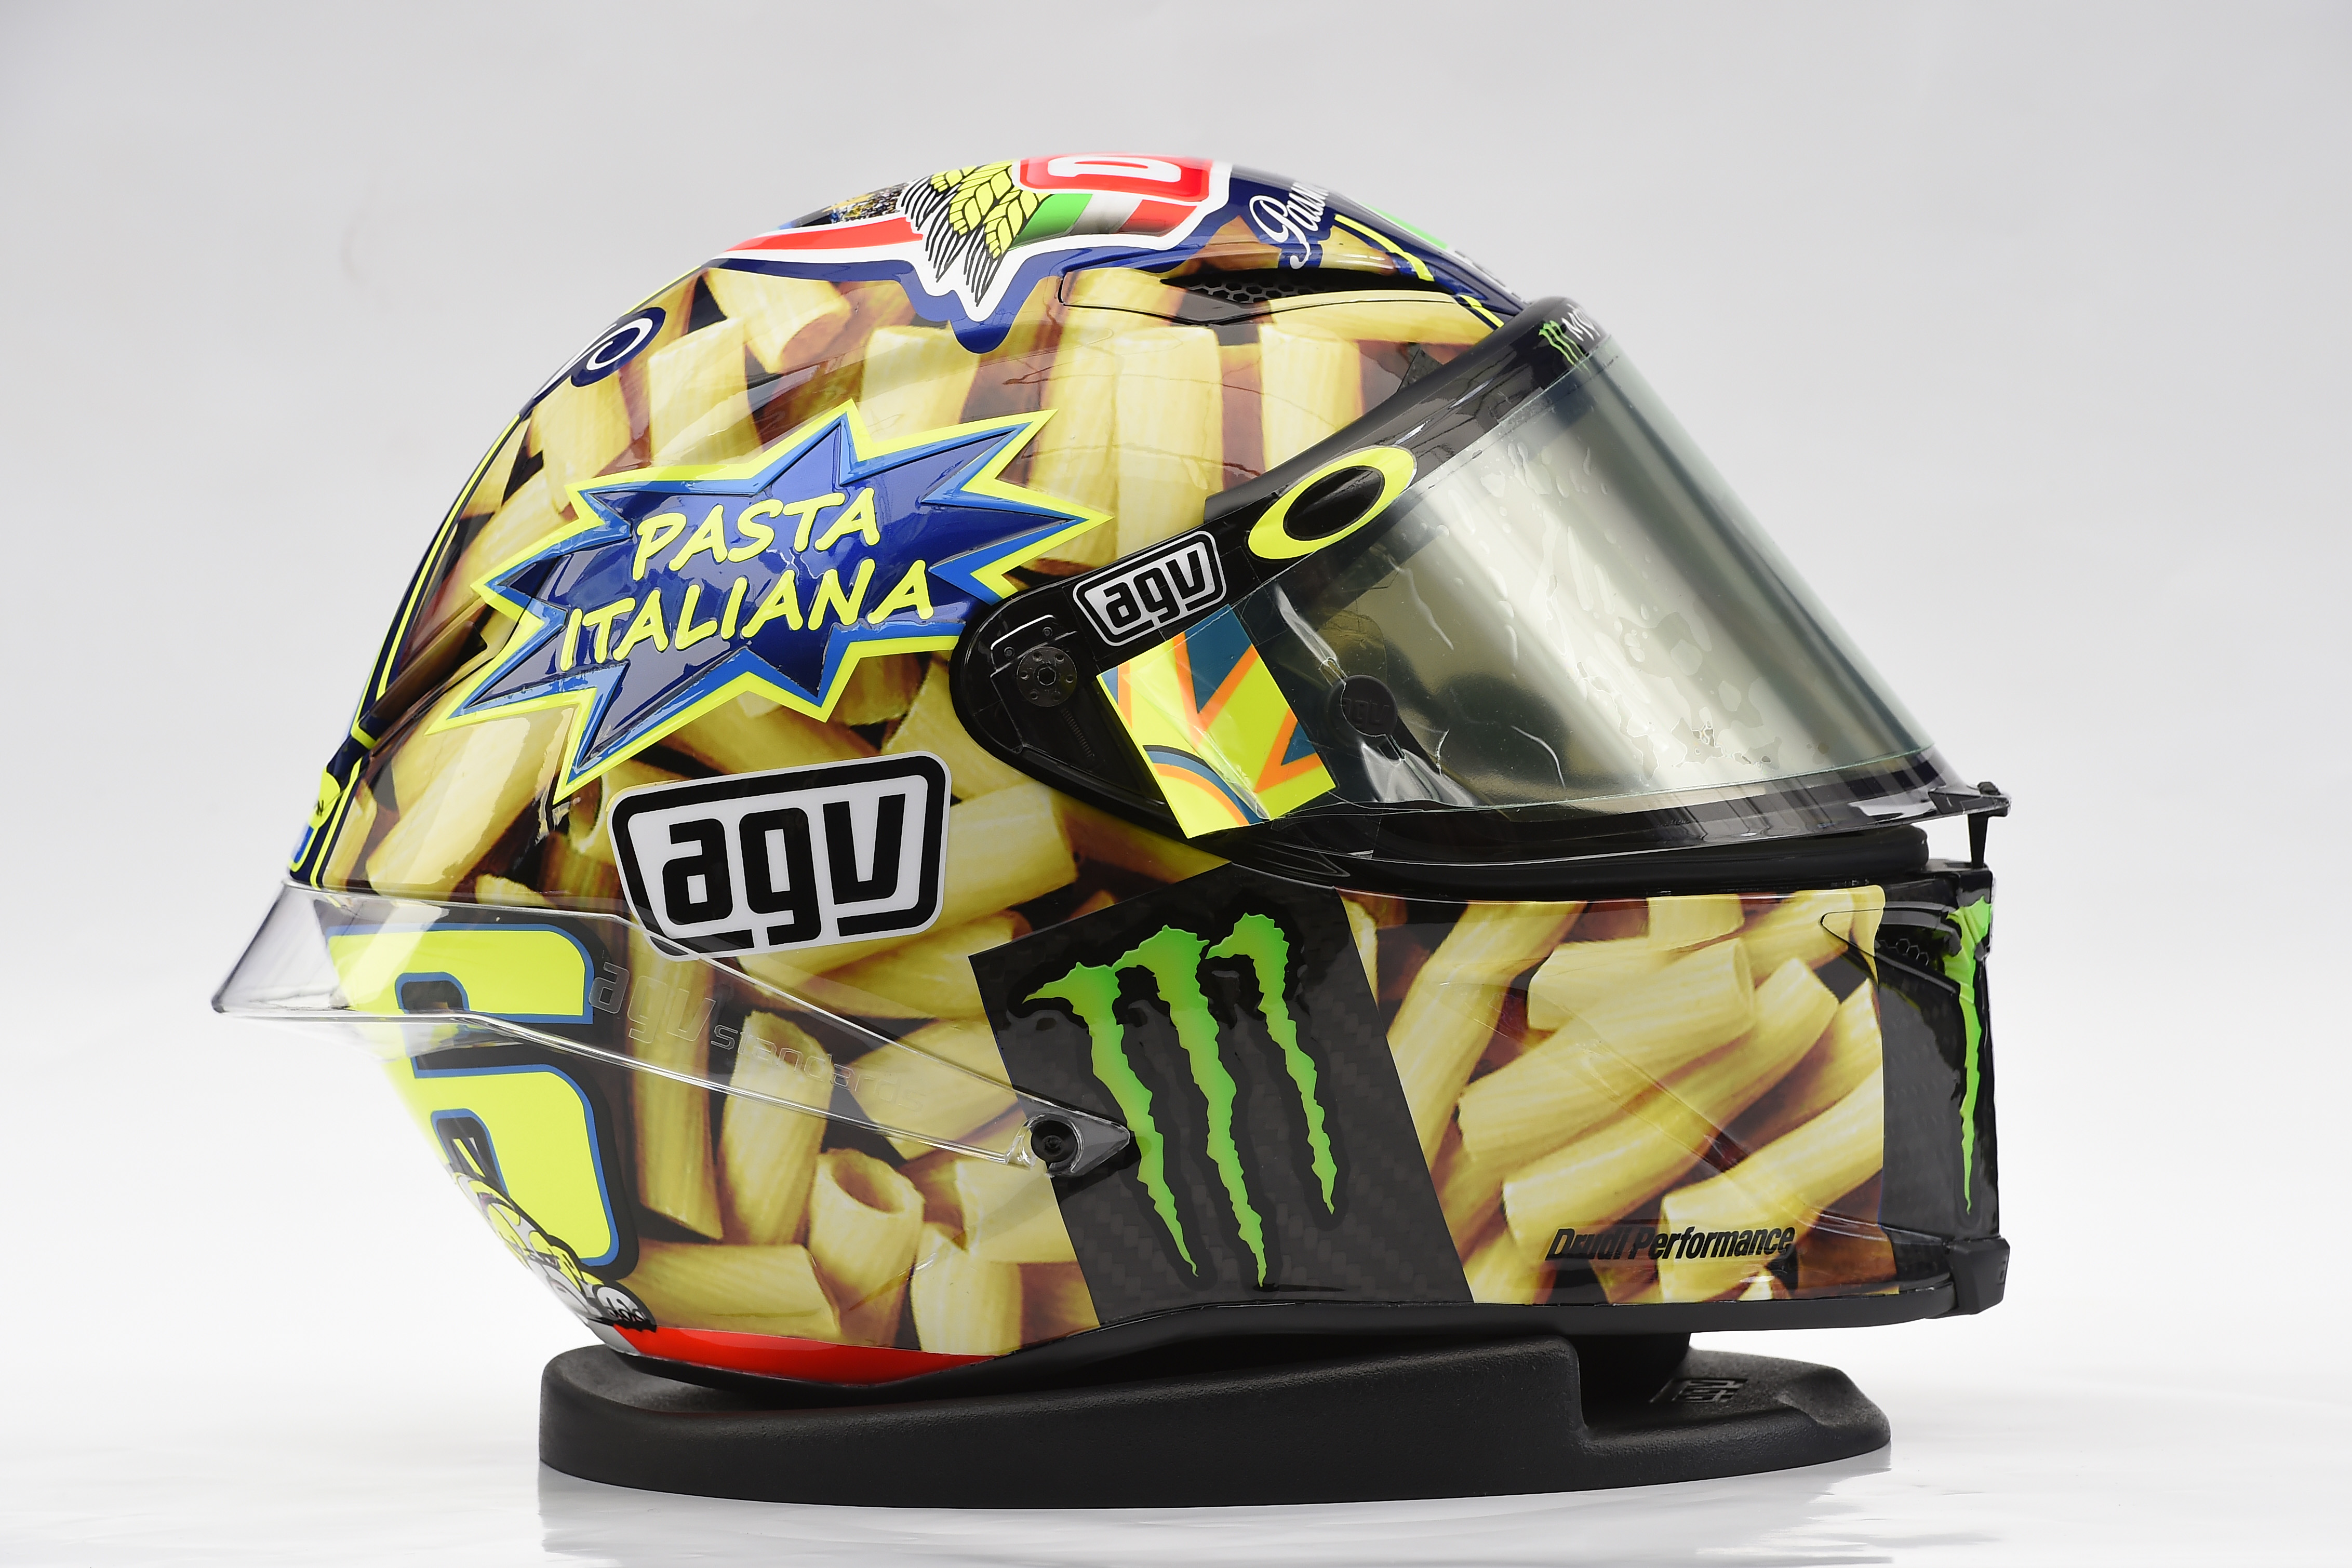 Arbejdskraft Indrømme Hummingbird The Stories Behind Valentino Rossi's Special Home-Race Helmets | Cycle World